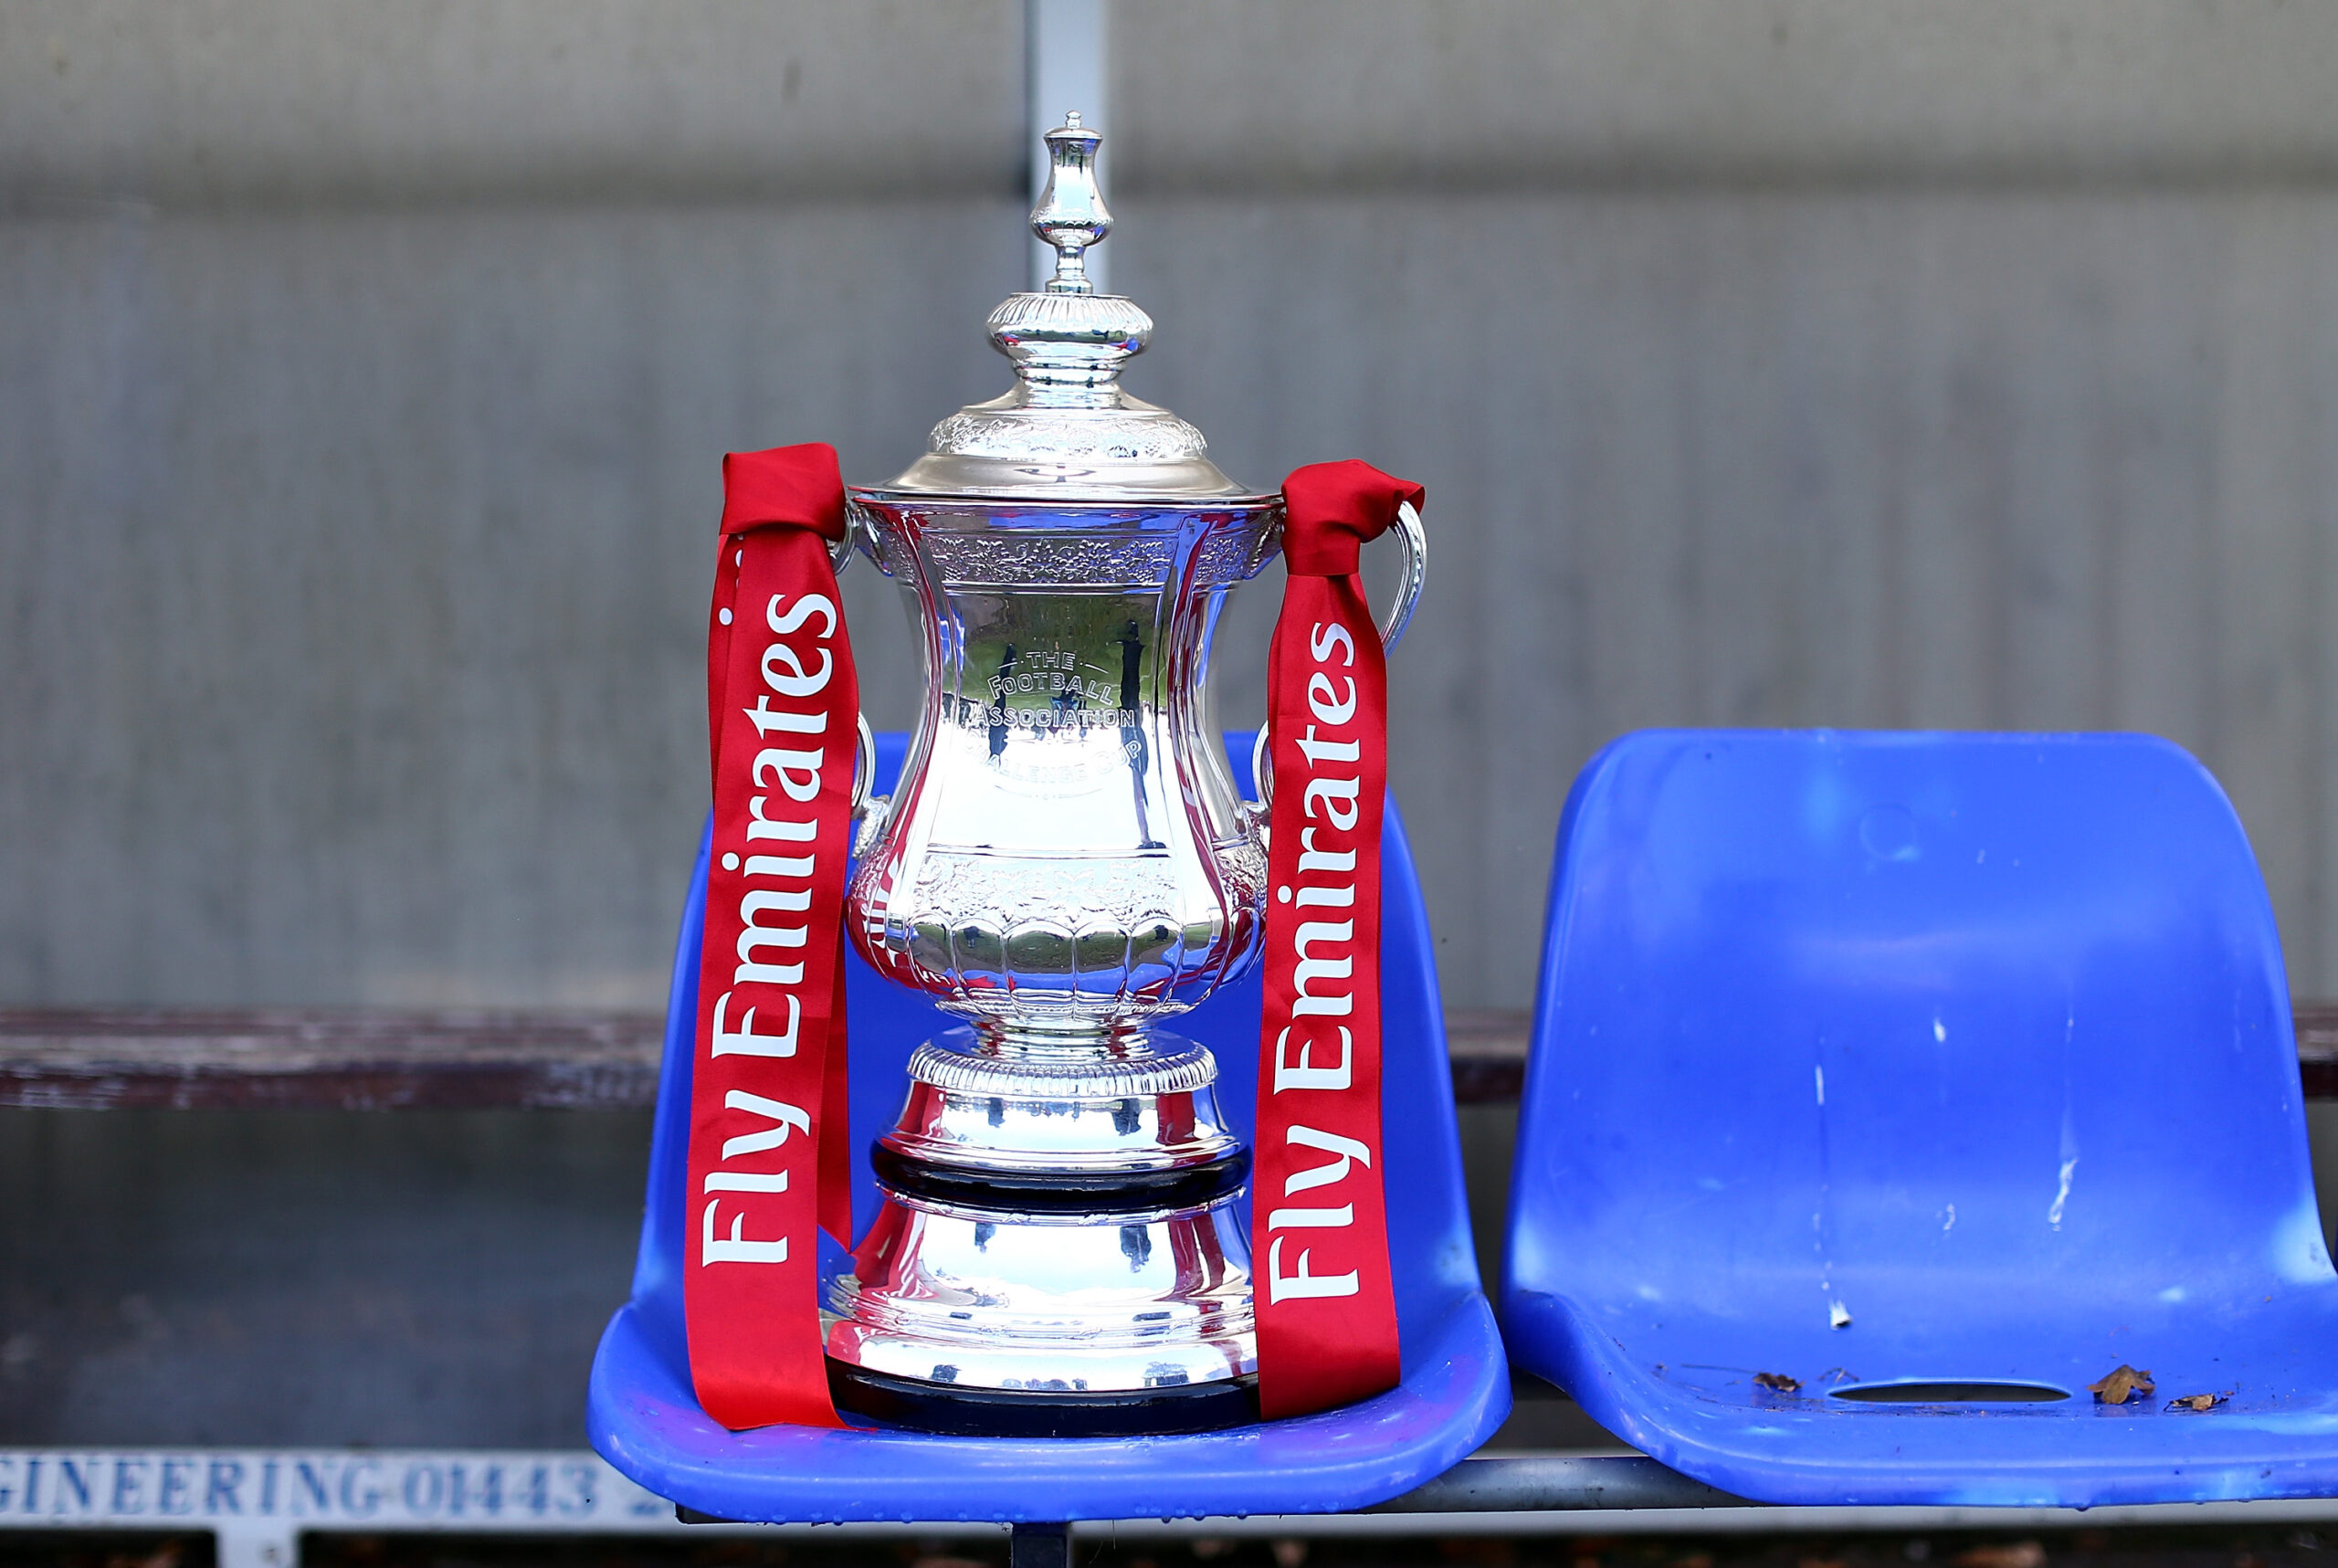 THE EMIRATES FA CUP 2020/21 FULL SCHEDULE CONFIRMED